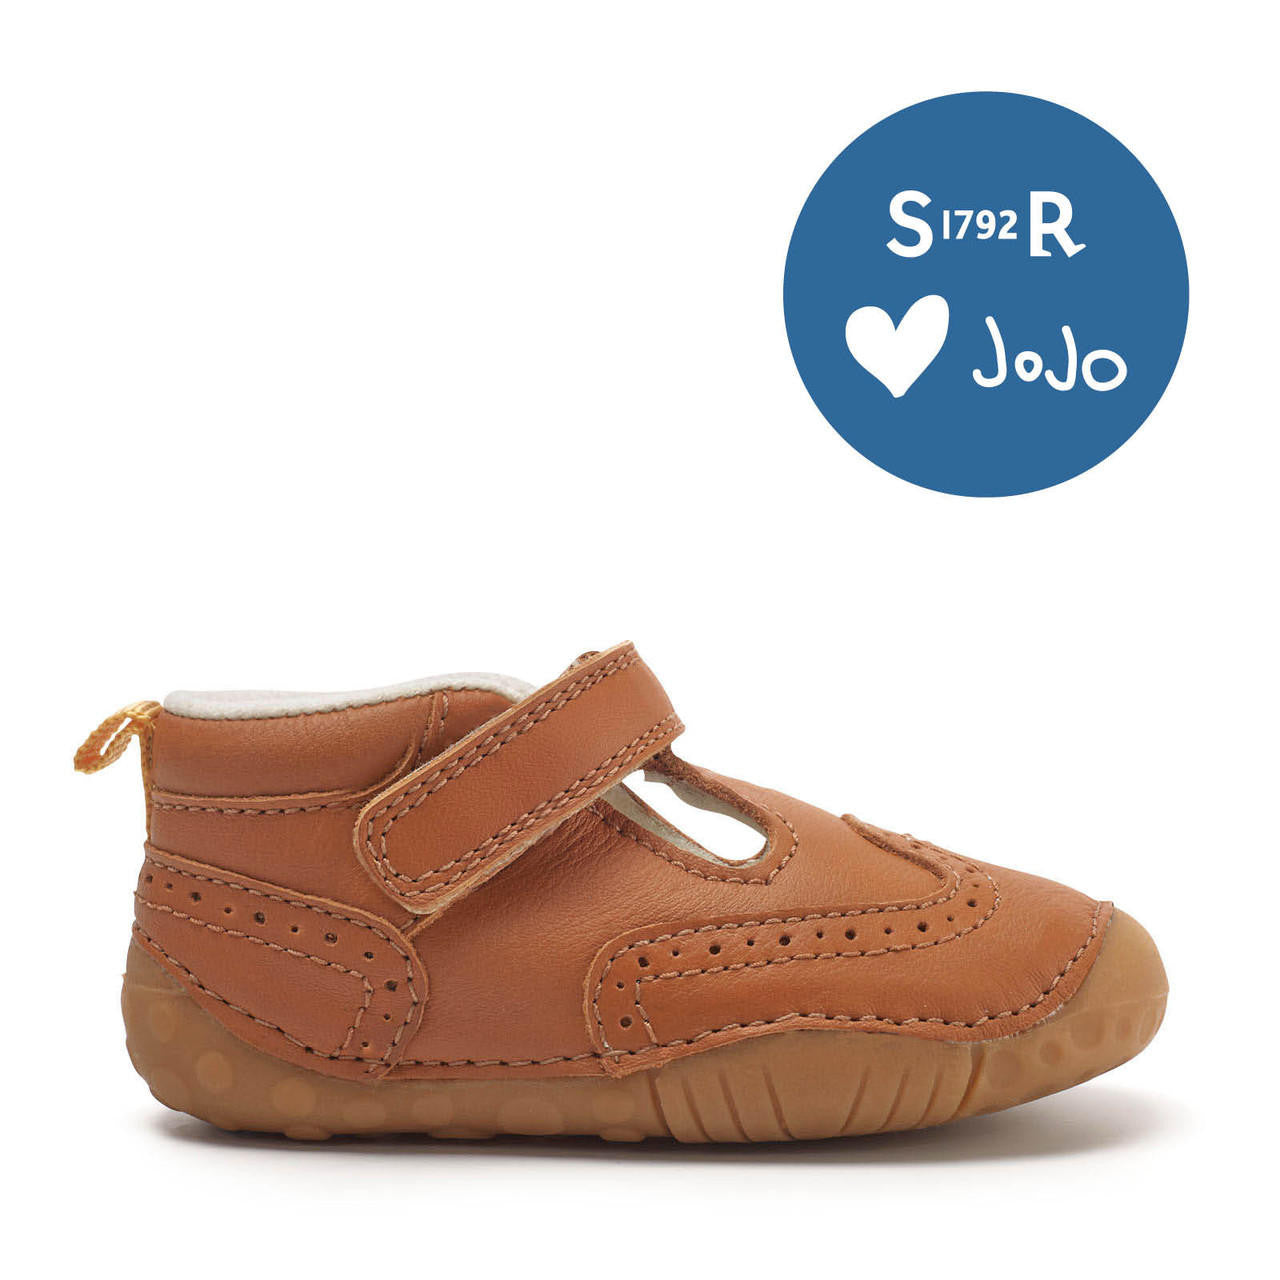 A boys T-Bar pre-walker by Start-Rite + JoJo Maman Bebe, style Share,in tan leather with brogue detail and toe bumper. Velcro fastening. Right side view.